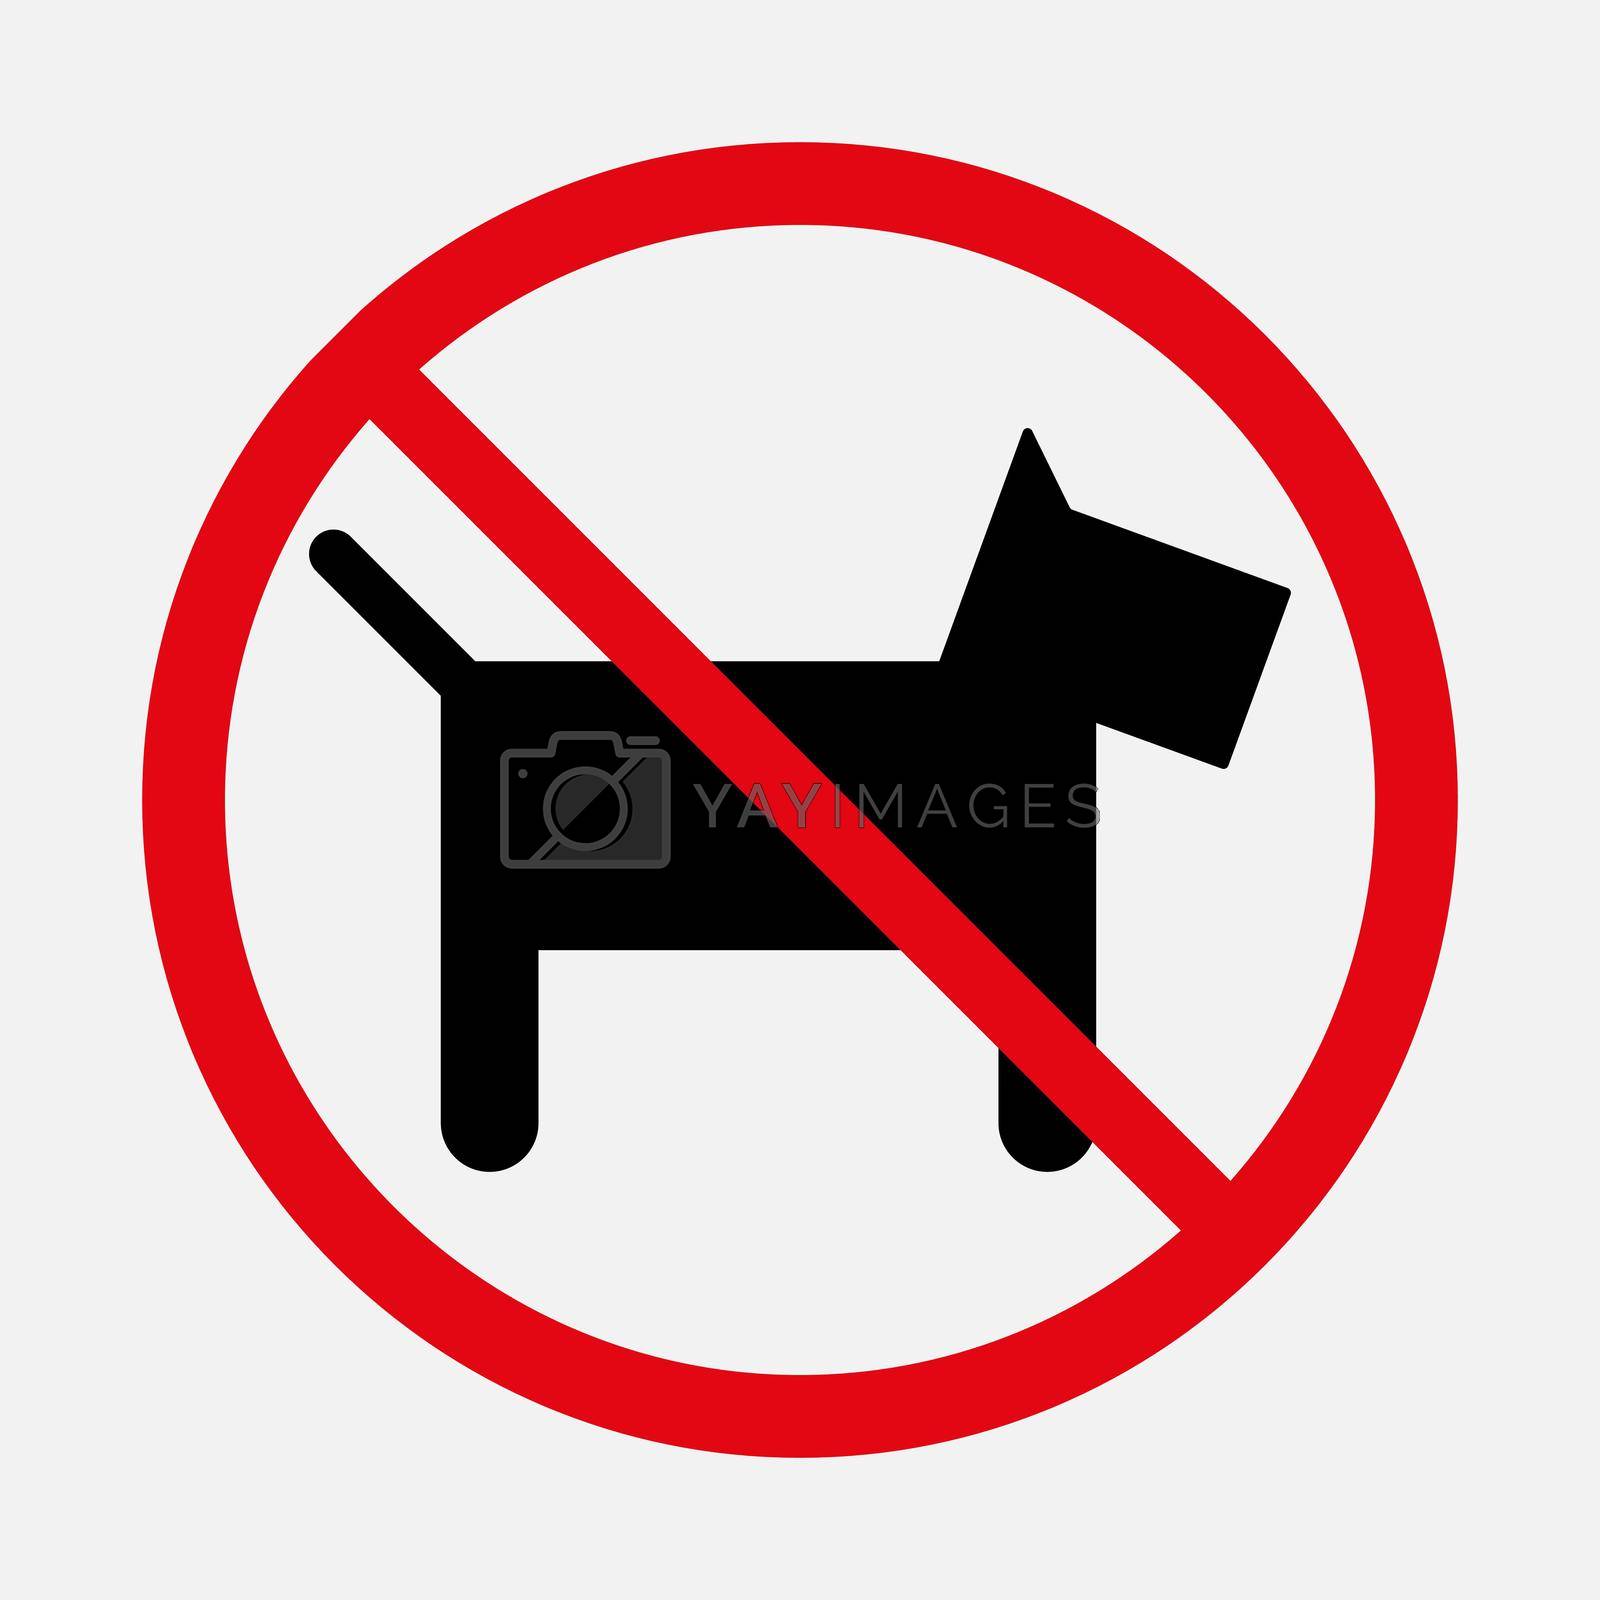 No dog icon. Vector illustration isolated on white background. No pets allowed. Prohibition sign.